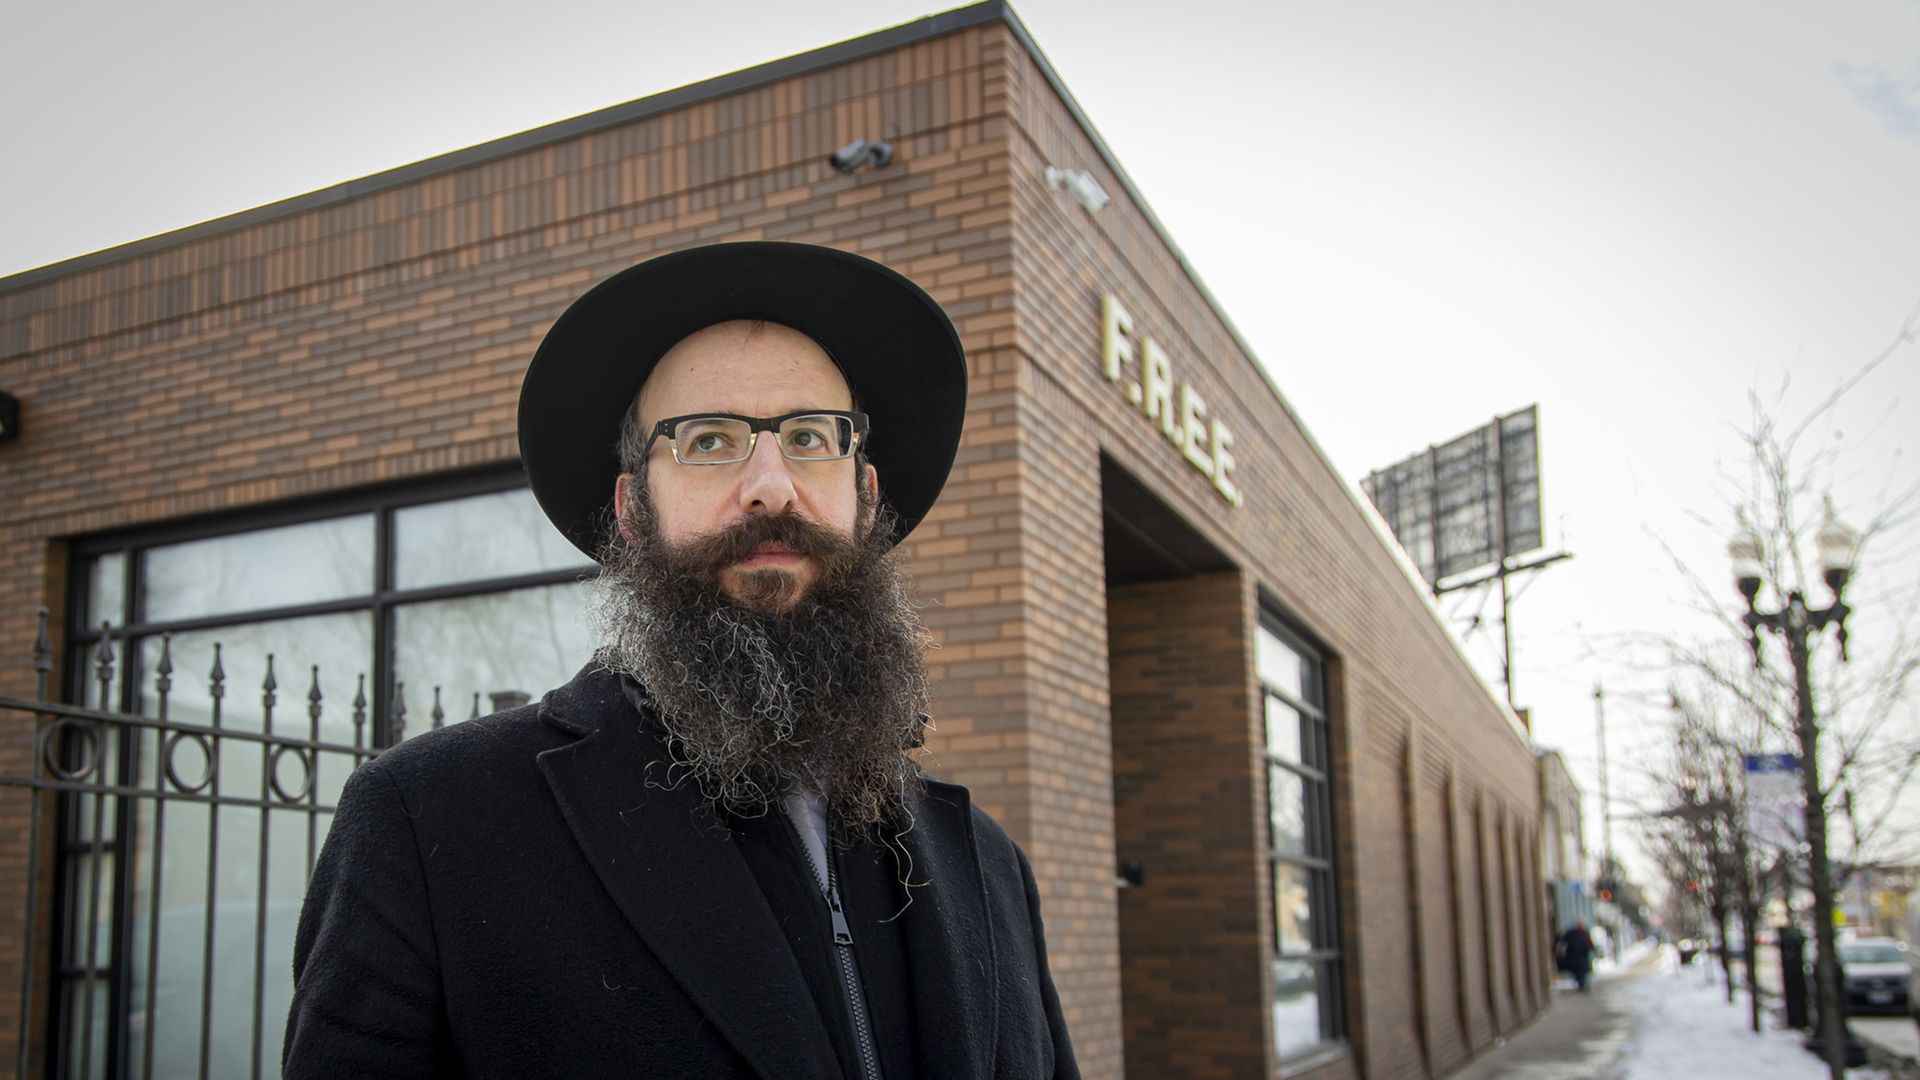 Rabbi Levi Notik outside F.R.E.E. synagogue in Chicago's West Rogers Park neighborhood on Monday, Jan. 31, 2022, after multiple Jewish businesses and synagogues were vandalized.